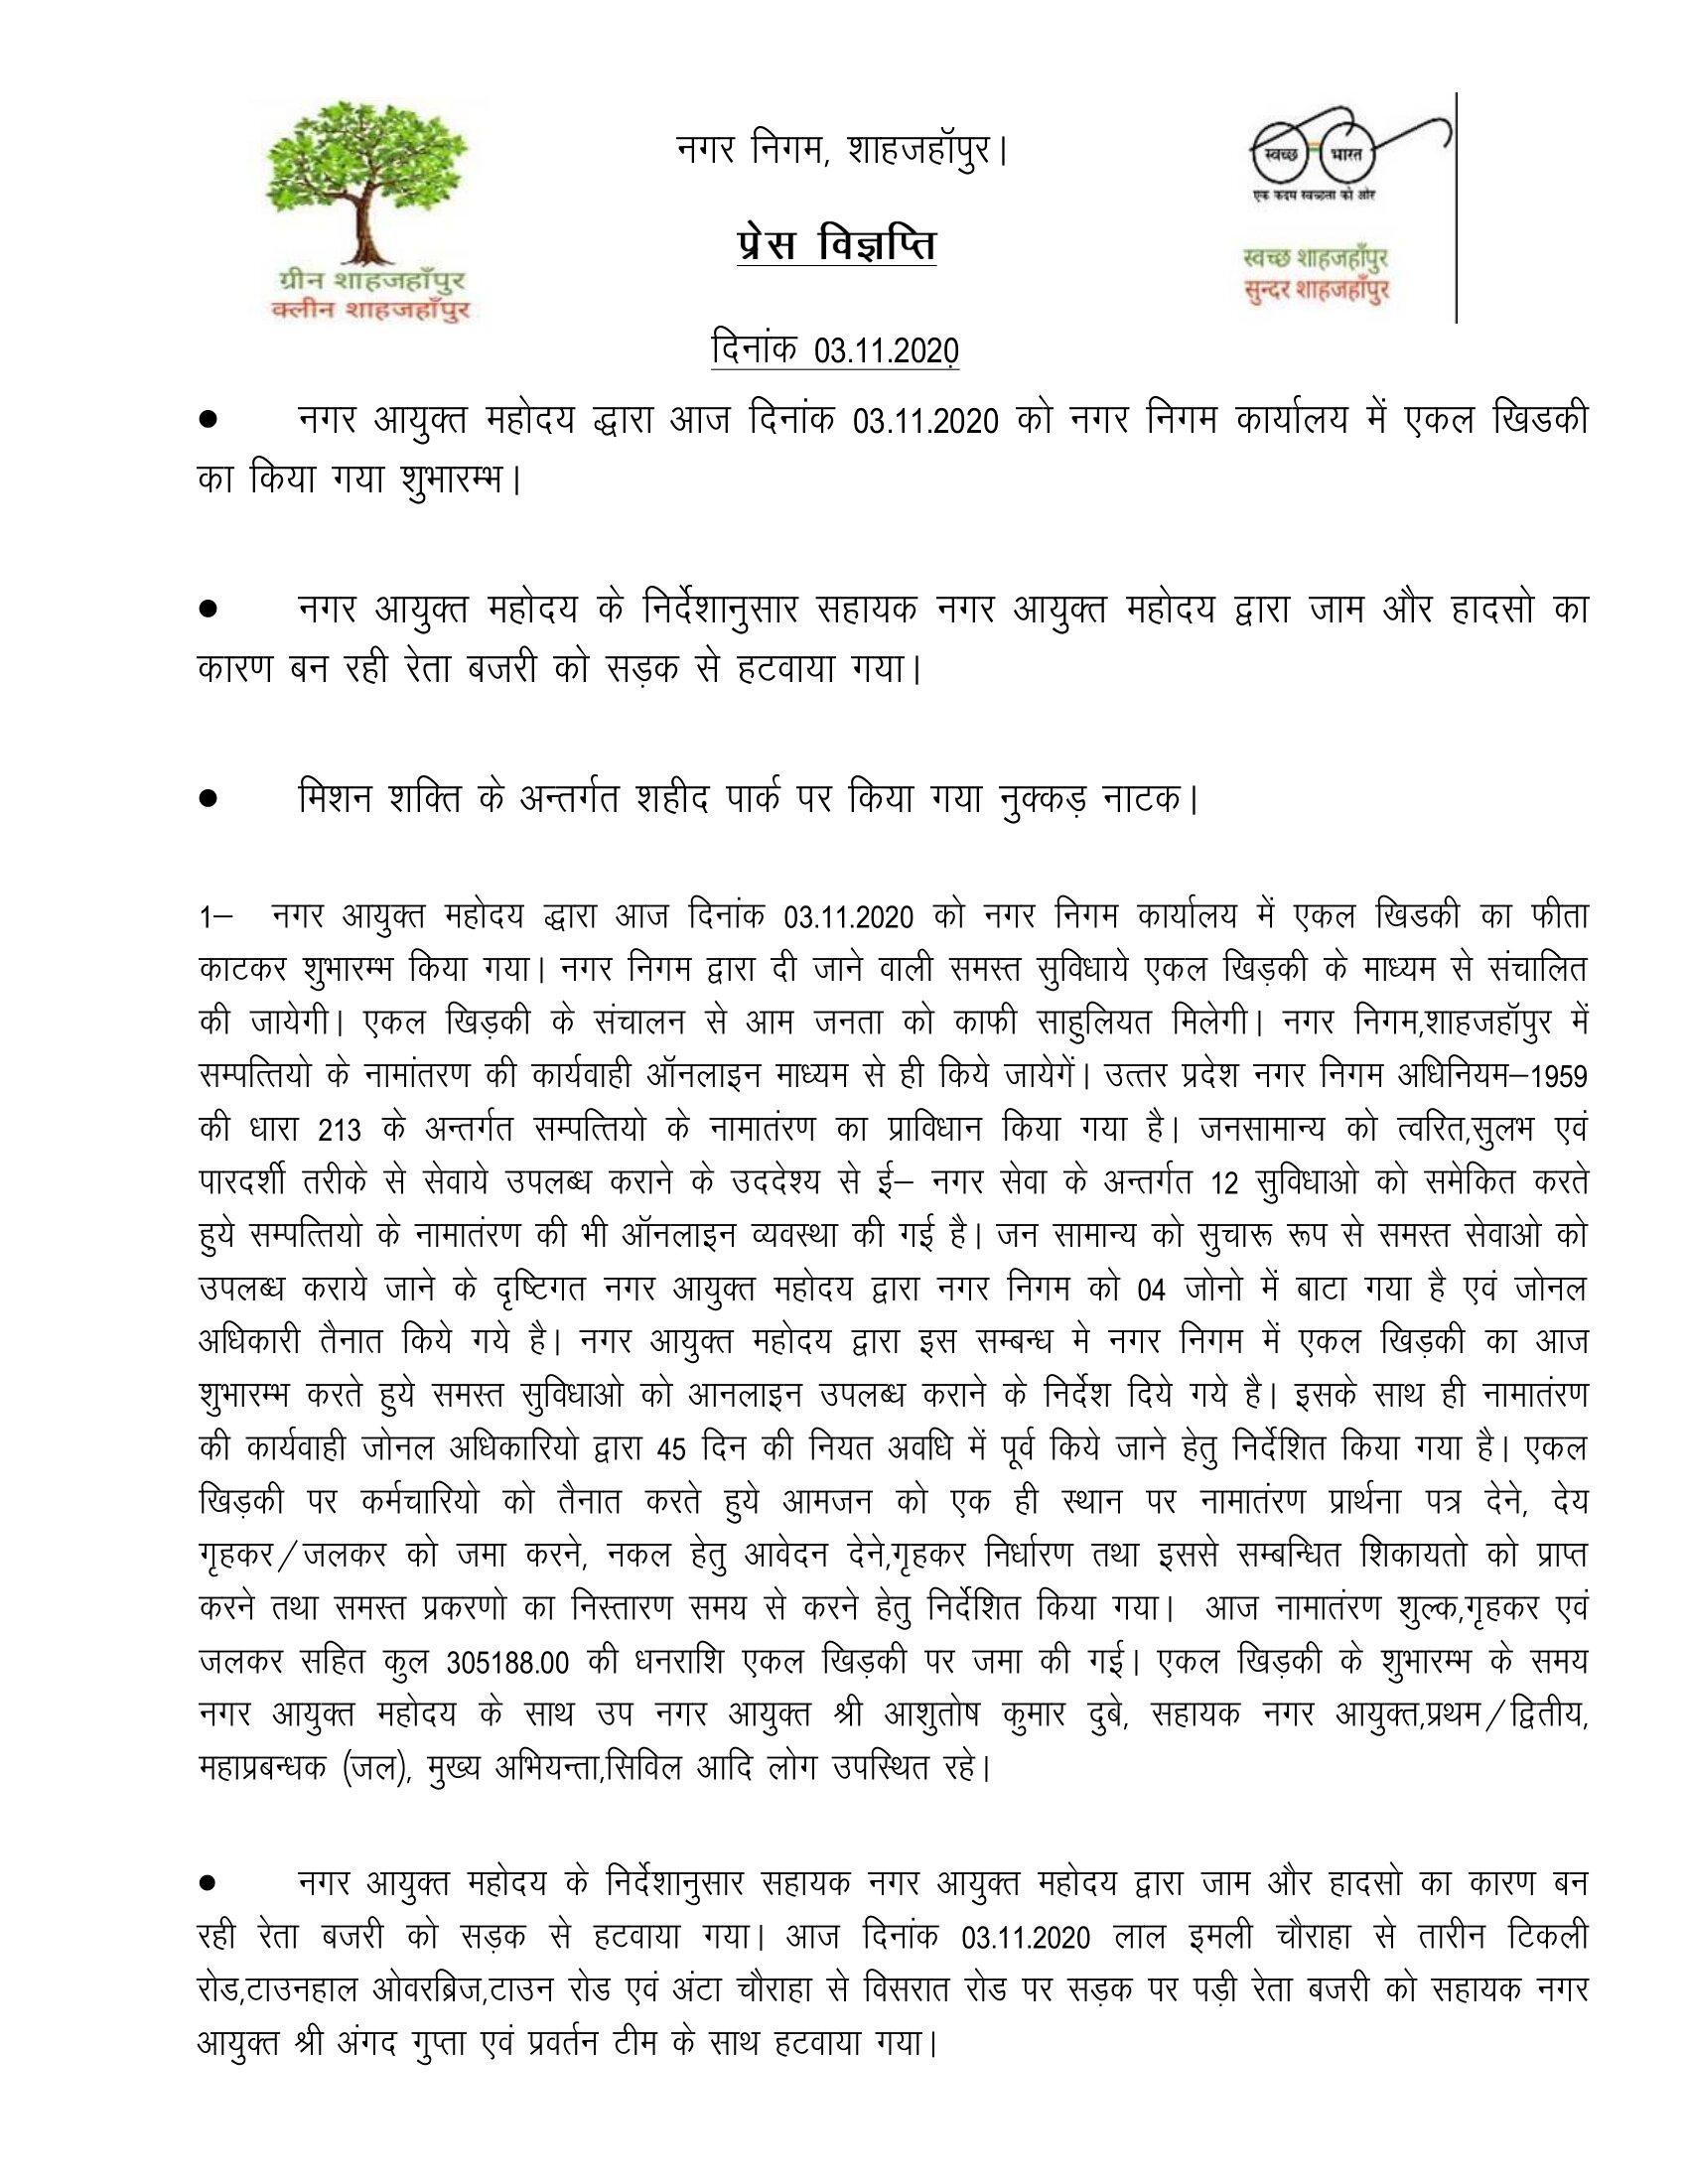 Regarding launching of Single Window in the Nagar Nigam office on 03.11.2020 by City Commissioner